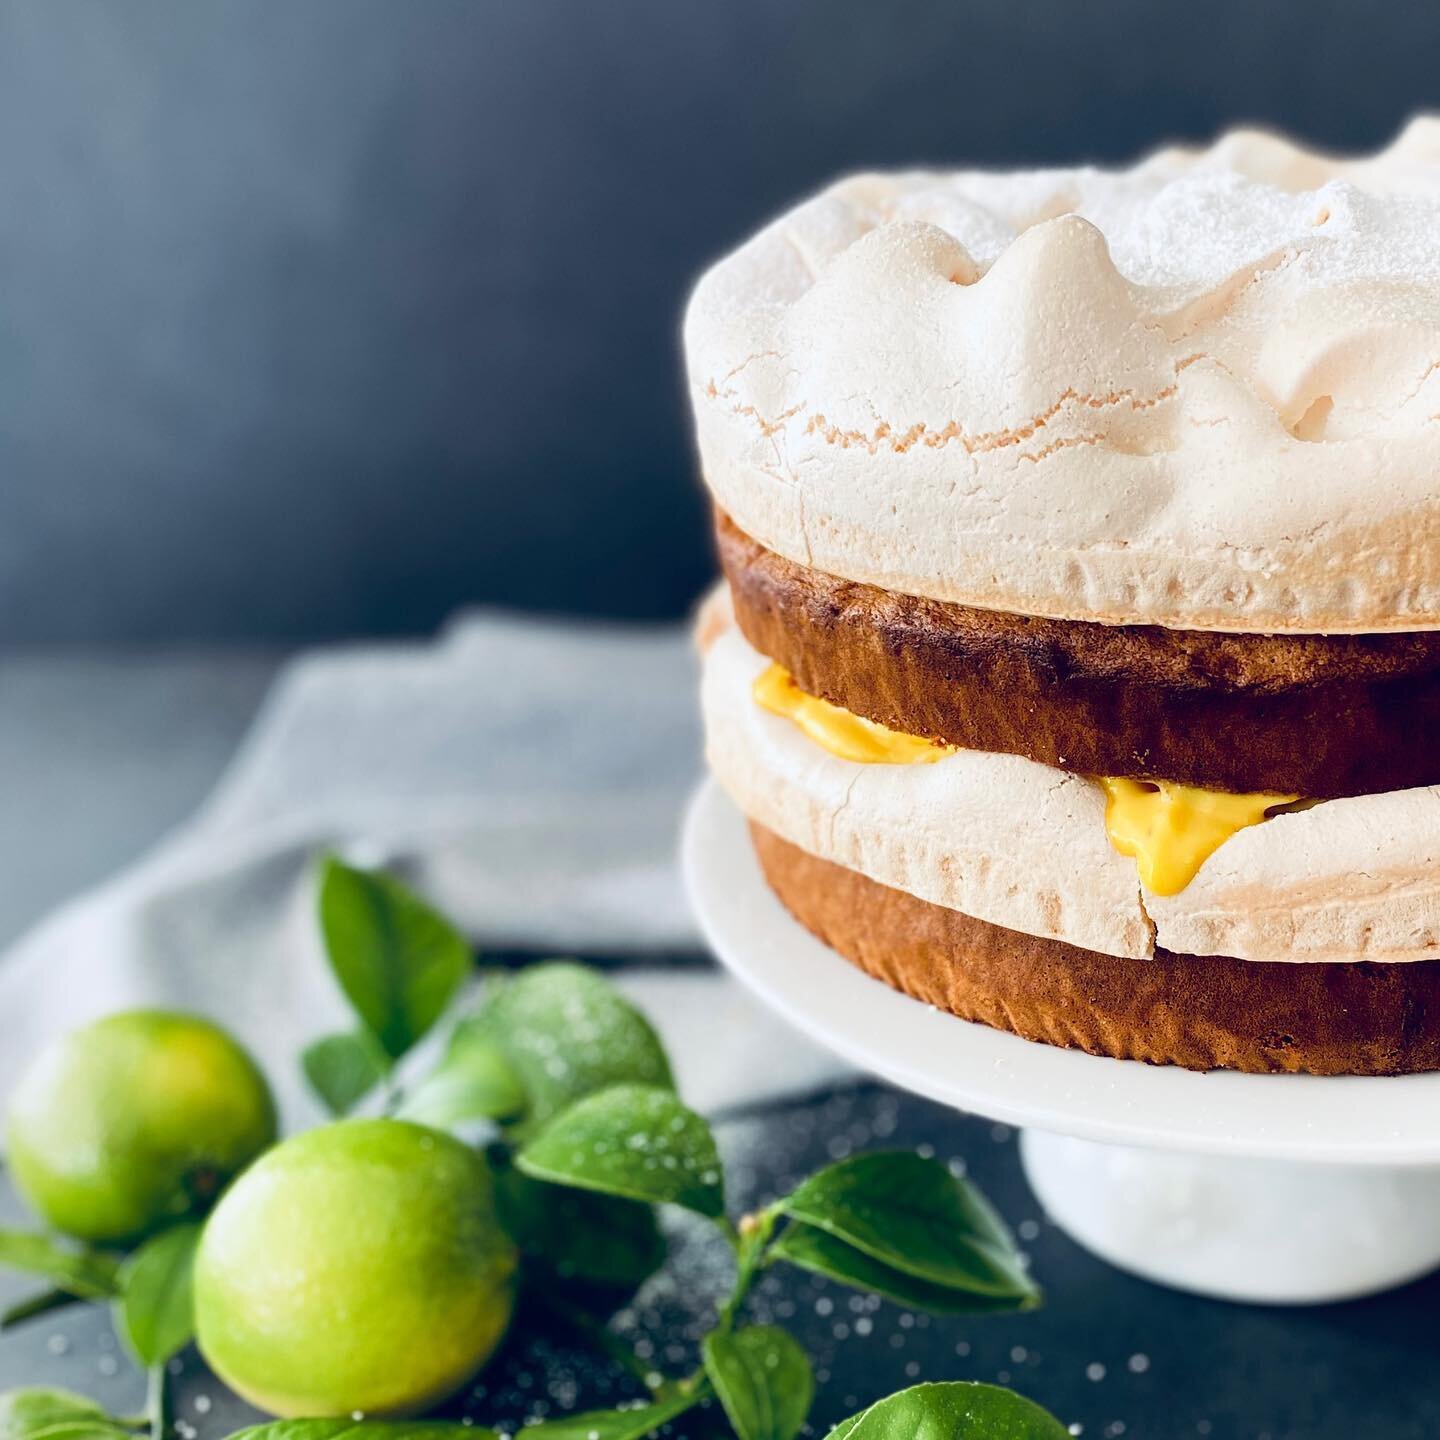 Not long now until the recipe for my dreamy Lime &amp; Coconut Cloud Cake graces the pages of @fleurieulivingmagazine Spring edition 🌸 Out soon! 
.
.
.
#cloudcake #limeandcoconut #springcitrus #meringue #cakesofinstagram #sweettooth #pastry #pastryc